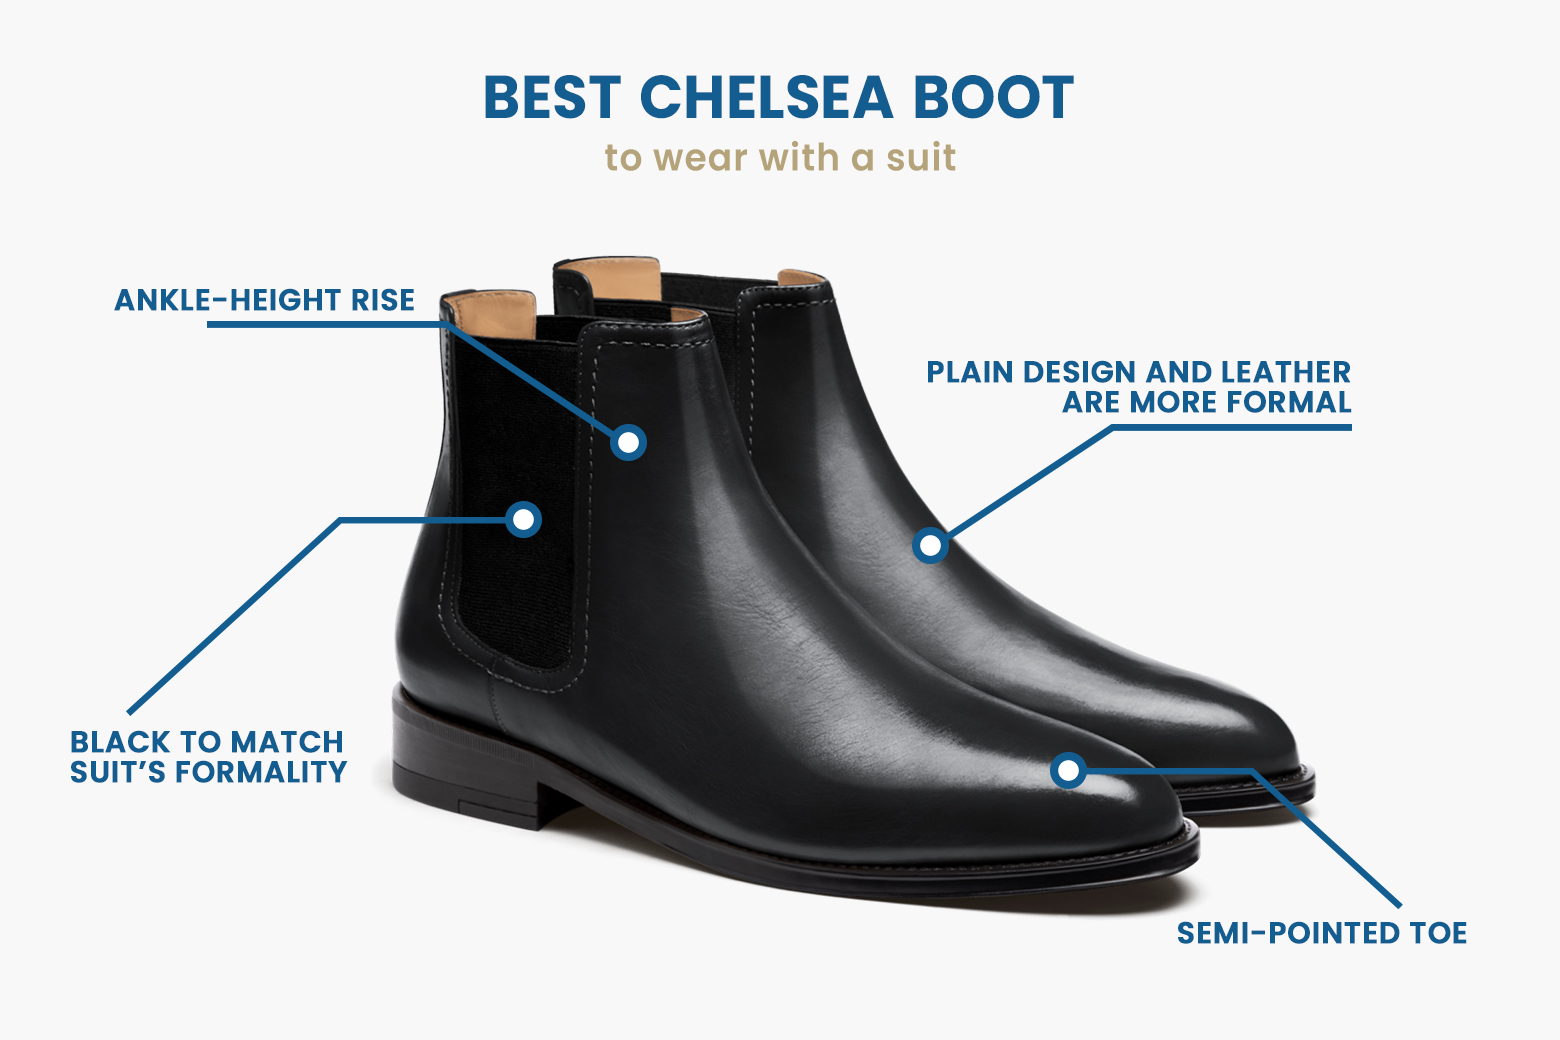 type of Chelsea boot to wear with a suit